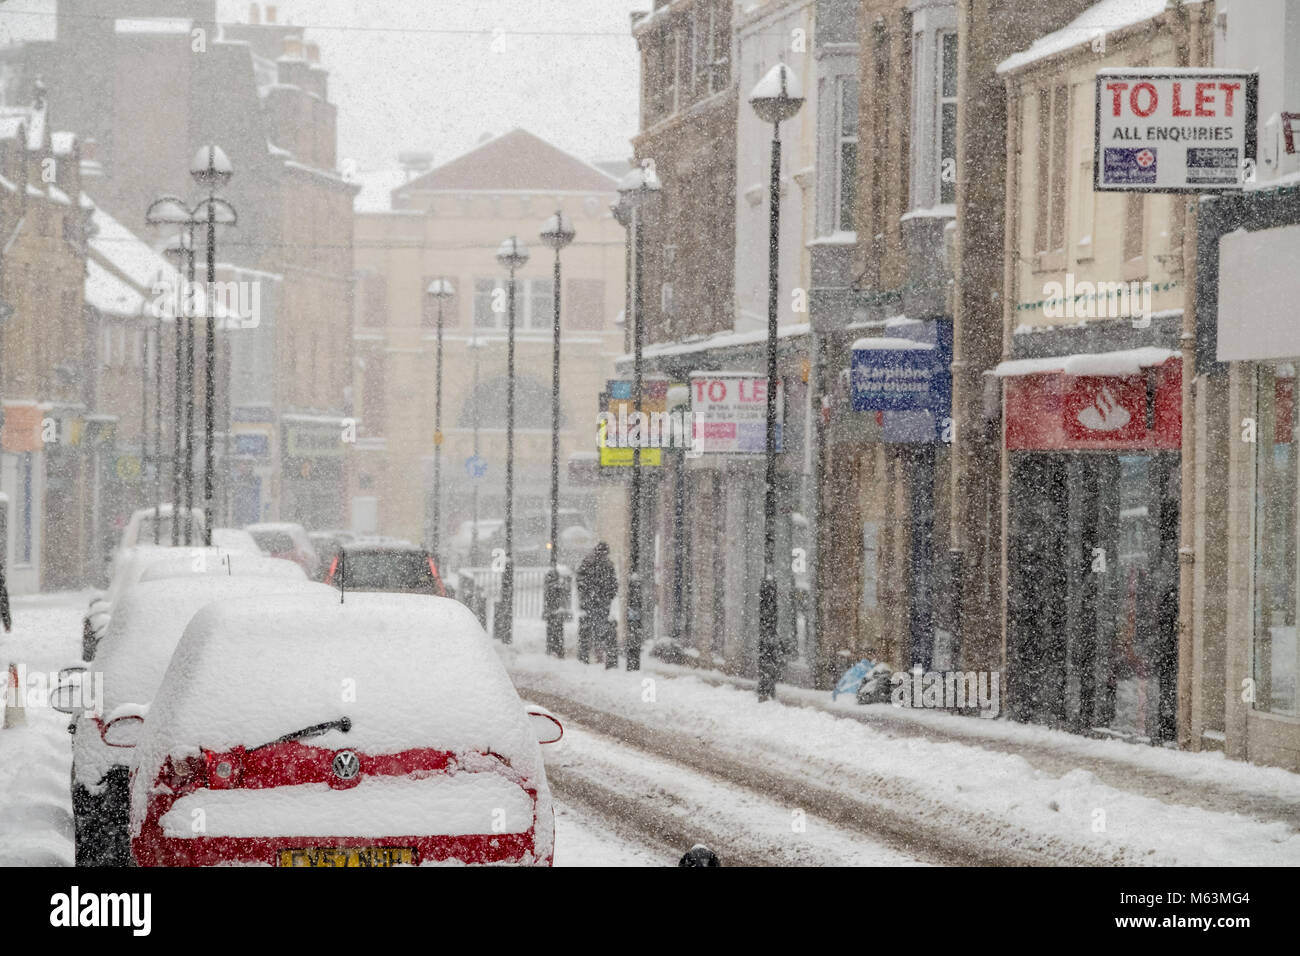 Galashiels, Galashiels, UK. 28.Feb.2018.   Beast from the East Storm hits Scottish Borders Caption: Blizzard conditions sweep across the Scottish Borders  Galashiels town centre, shops close early snow covered cars parked (Photo: Rob Gray) Credit: Rob Gray/Alamy Live News Stock Photo